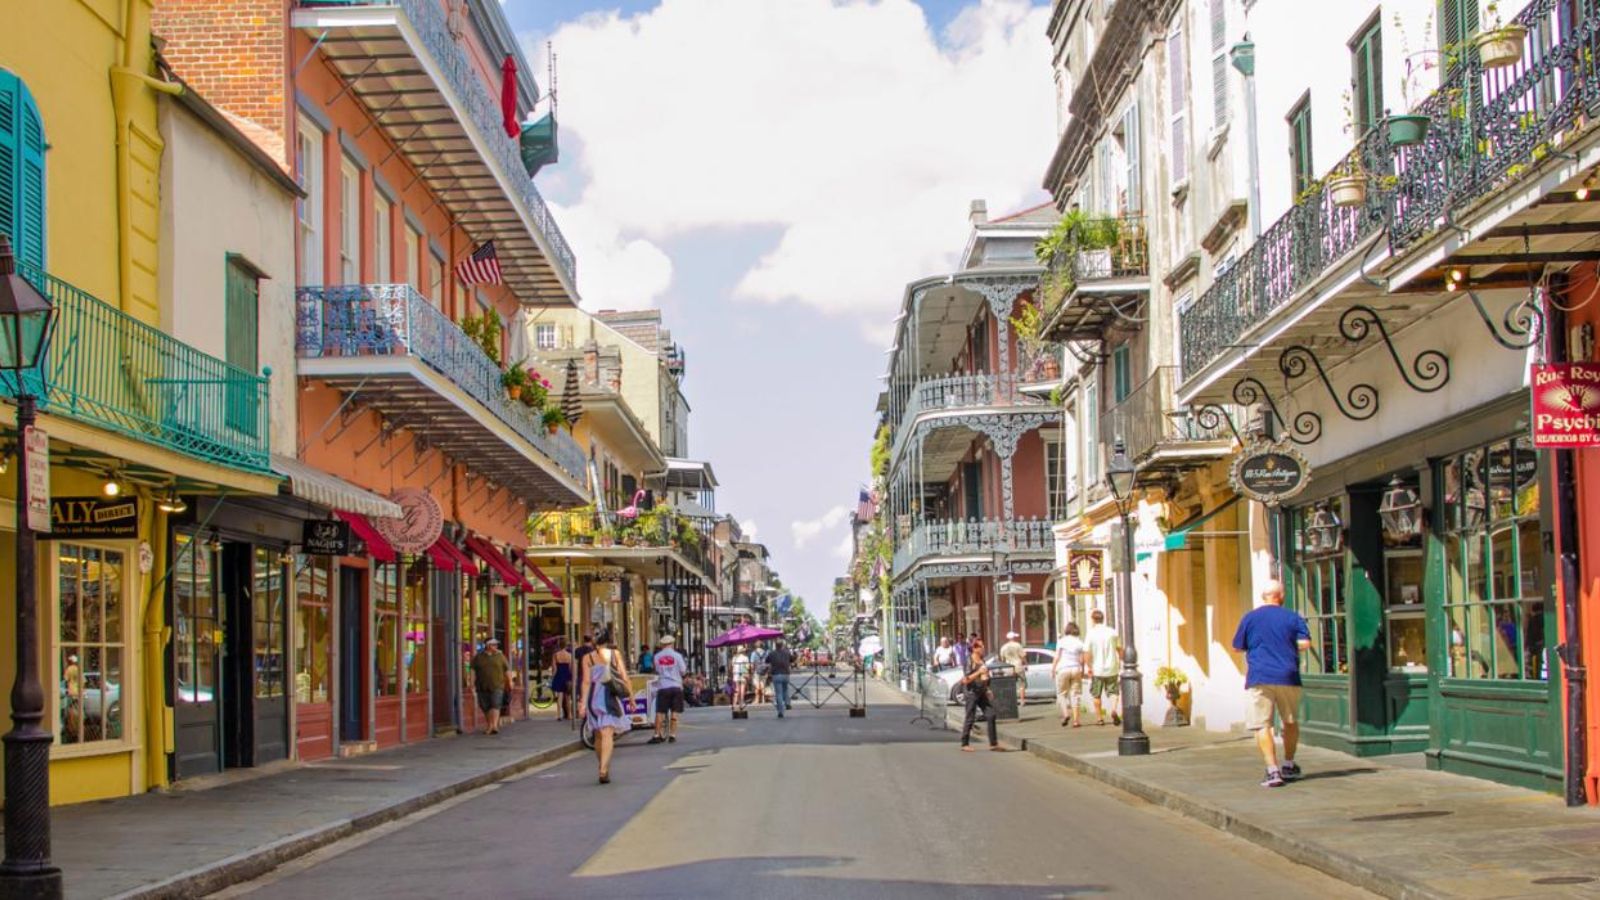 <p>Please understand that New Orleans is a <a href="https://ashandpri.com/little-known-travel-treasures-in-america-for-adventure-seekers-on-a-budget" rel="noopener">tourist destination</a> with plenty of pleasure and debauchery, and everyone should go there. But after you and other friends take a trip down Bourbon Street, please do yourselves a favor and conclude the evening. Leaving the tourist area increases your risk of being harassed, robbed, or worse.</p>